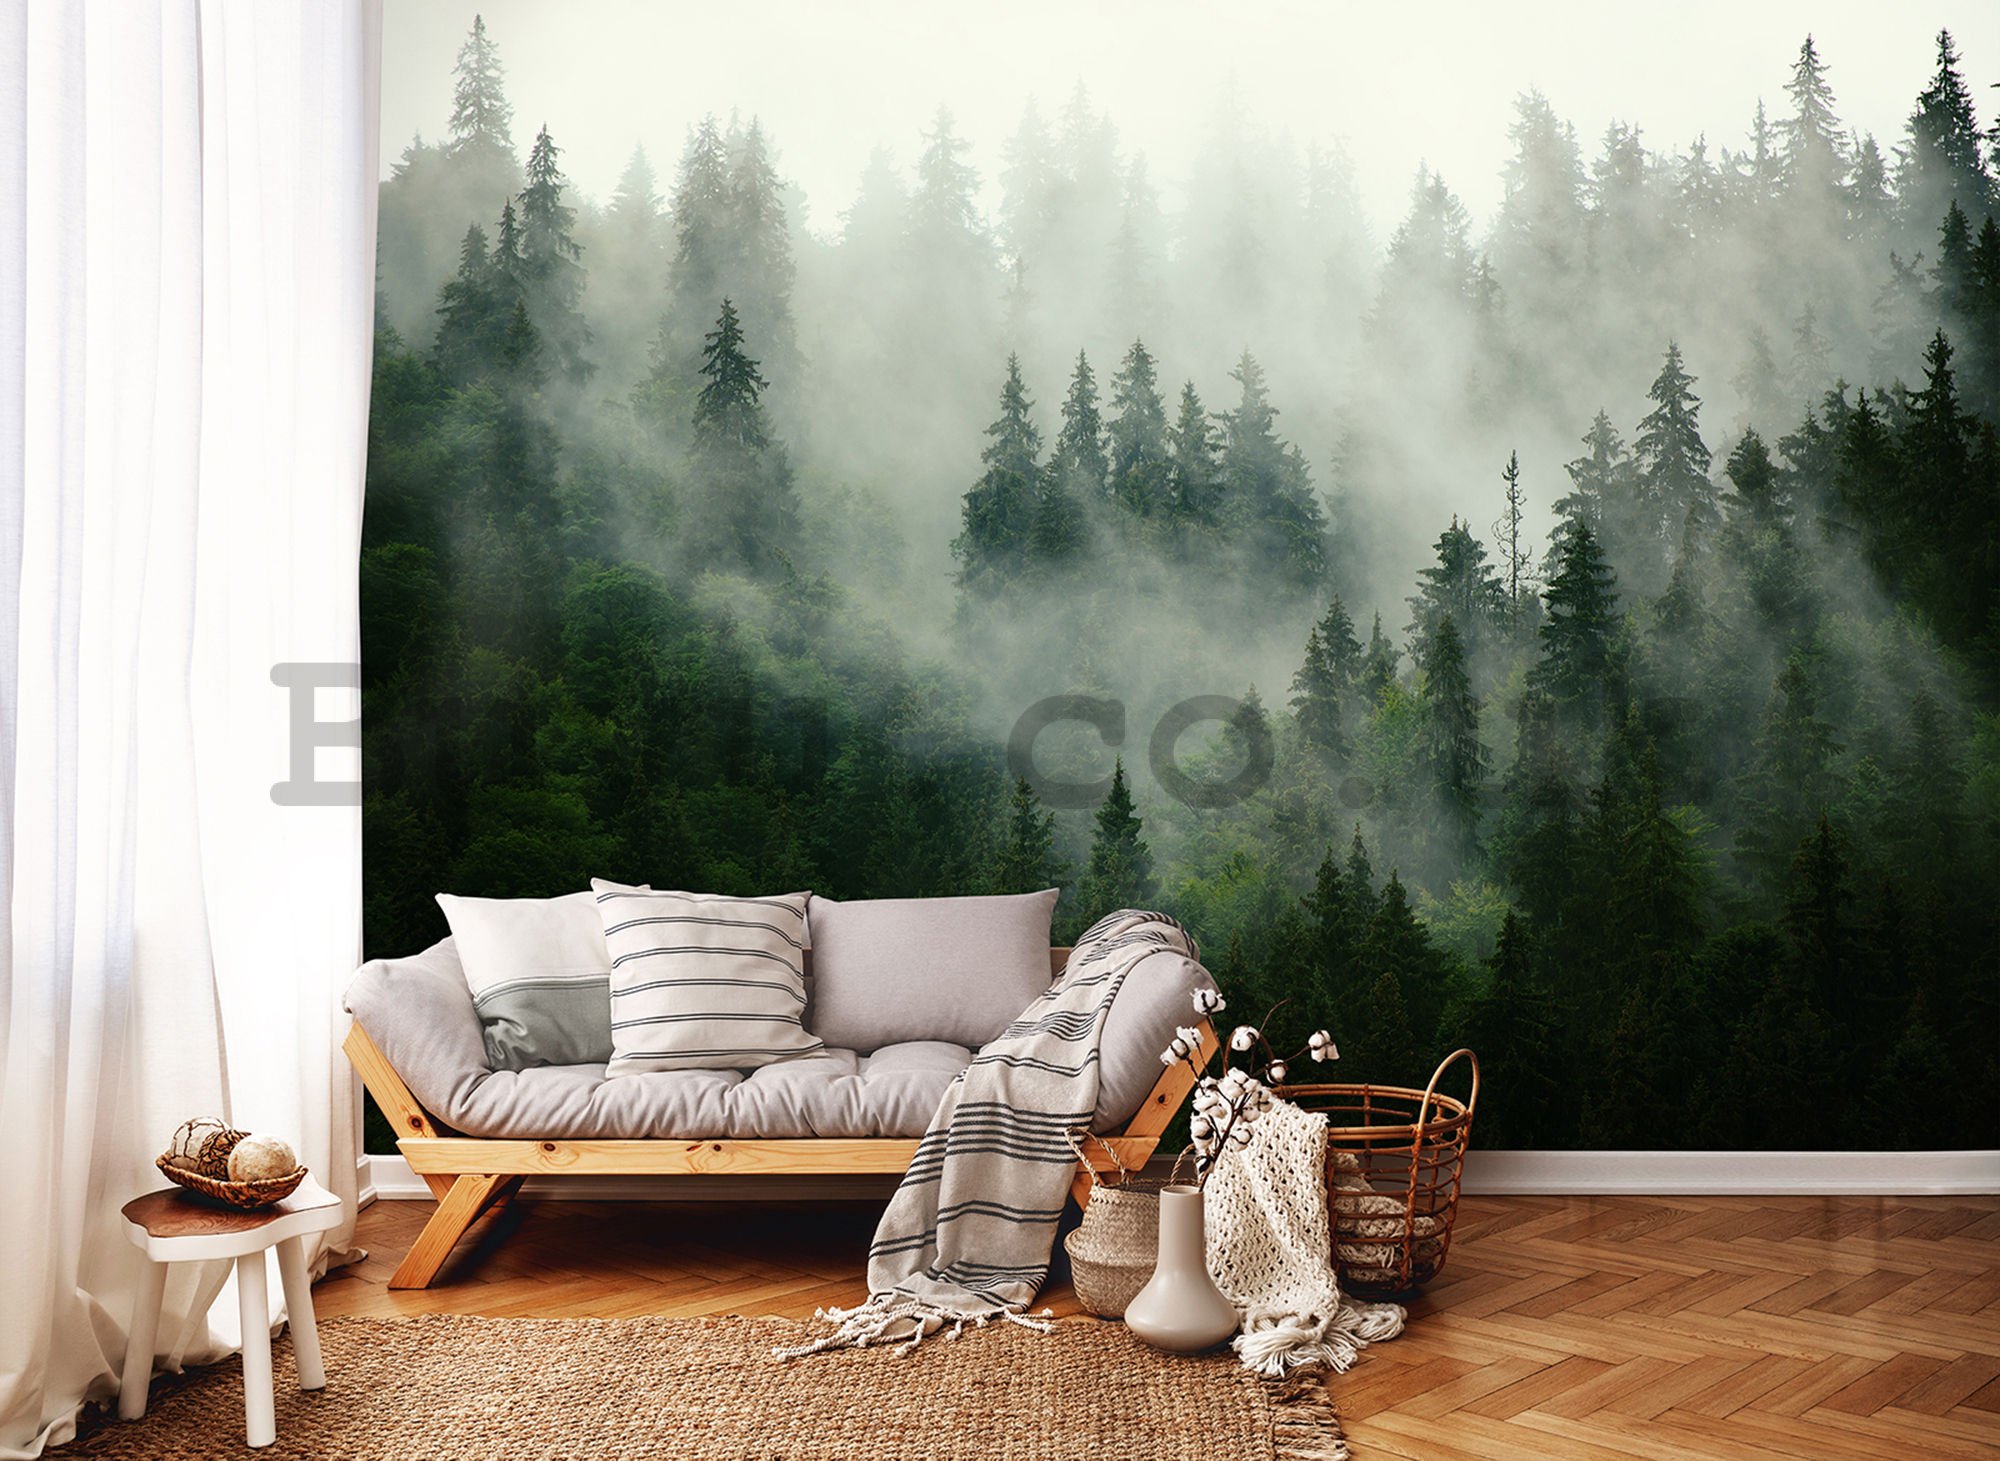 Wall mural vlies: Fog over the forest (1) - 254x368 cm